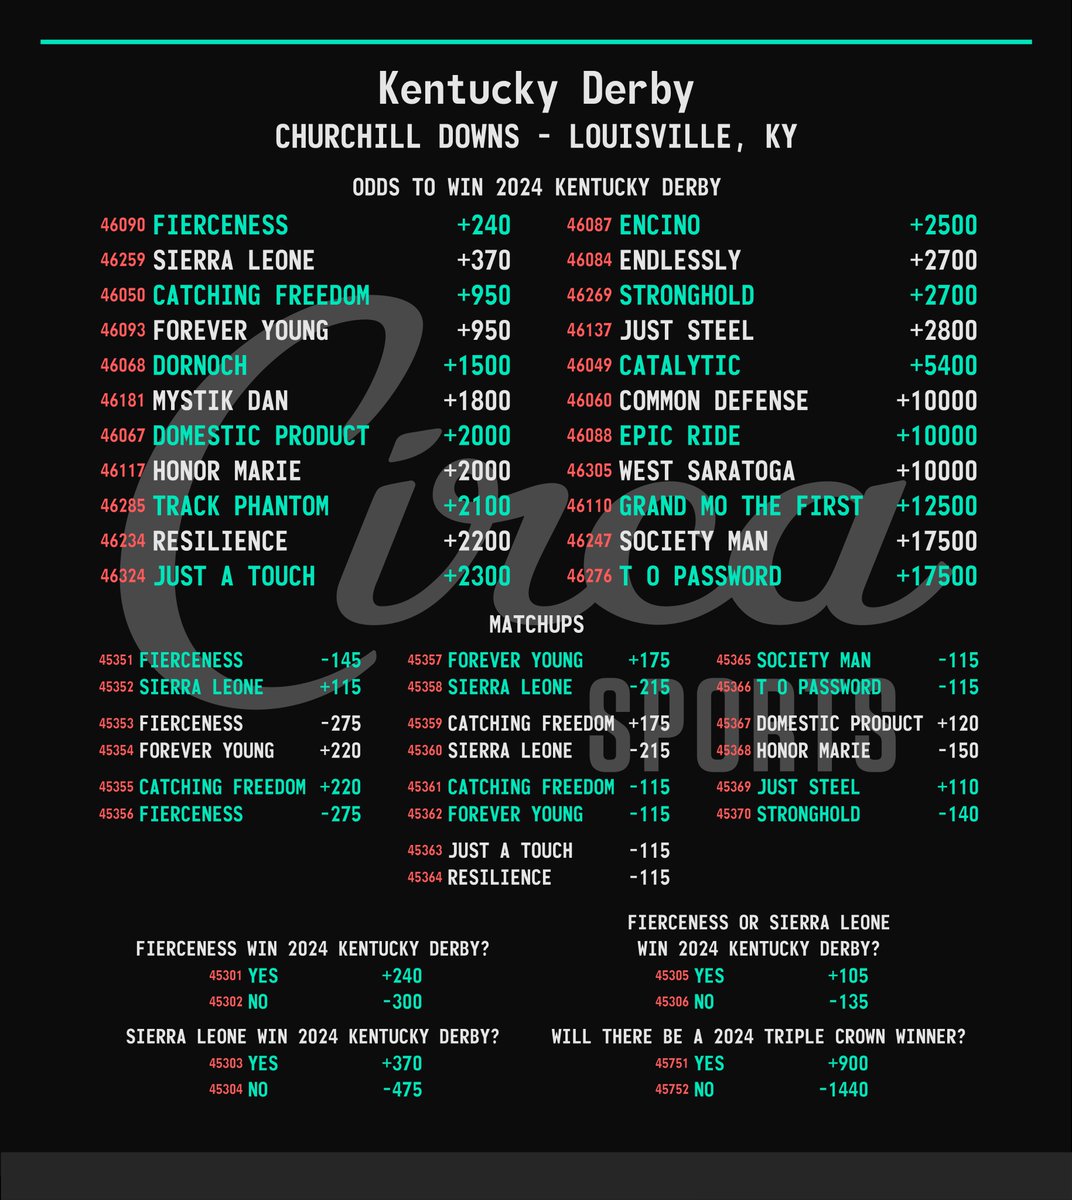 Kentucky Derby 🏇🏆 Odds To Win, Matchups & Props #KyDerby | #KentuckyDerby 🌹🏇